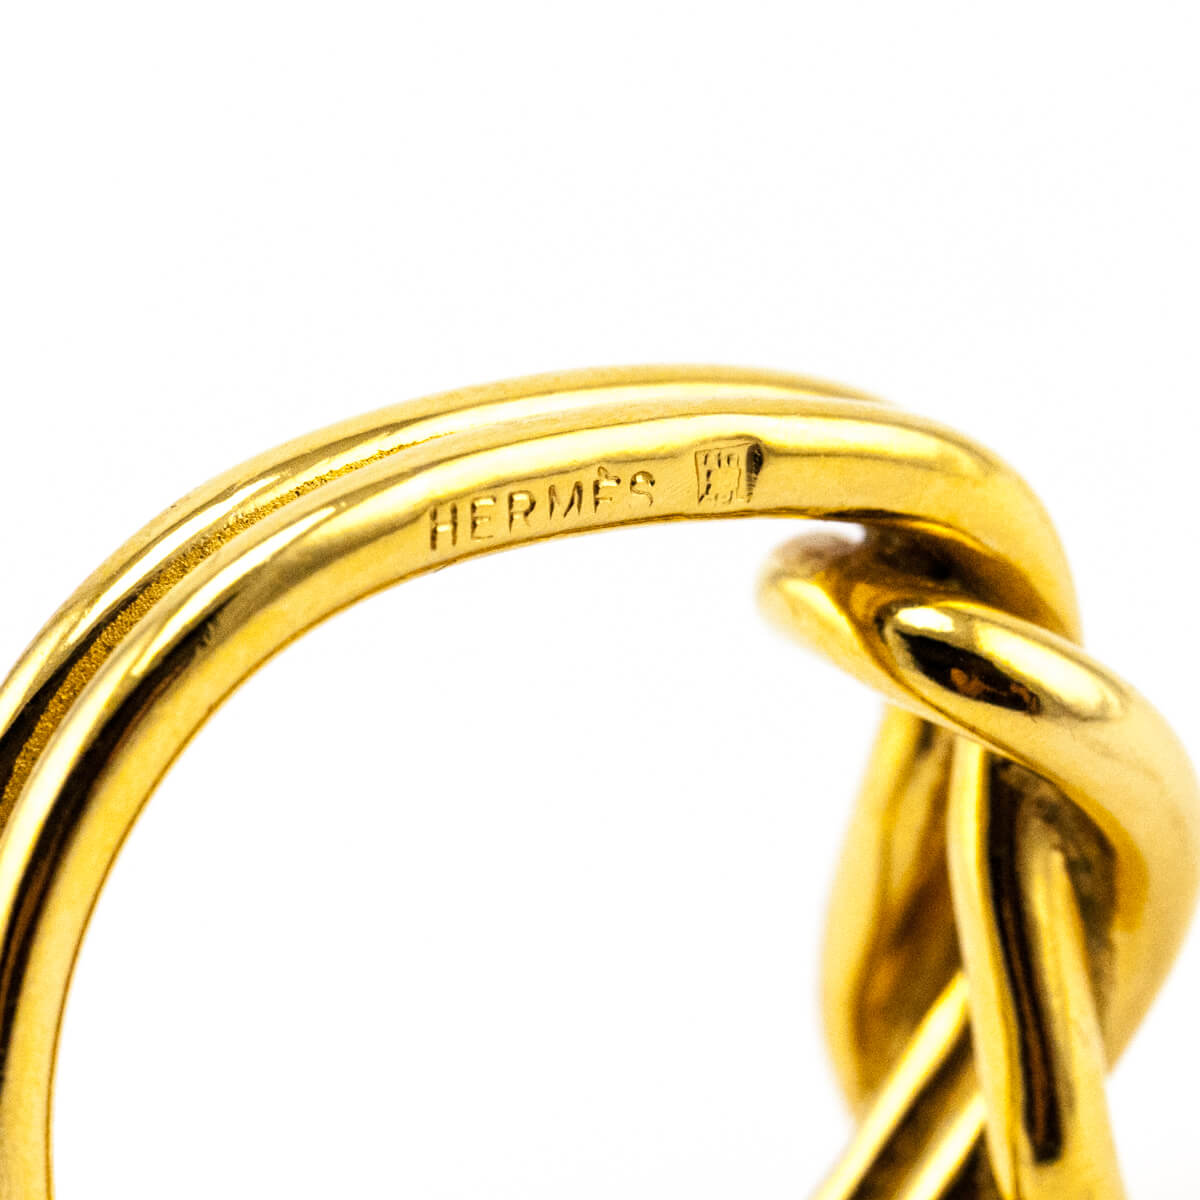 Hermes Gold Knot Scarf Ring - Love that Bag etc - Preowned Authentic Designer Handbags & Preloved Fashions